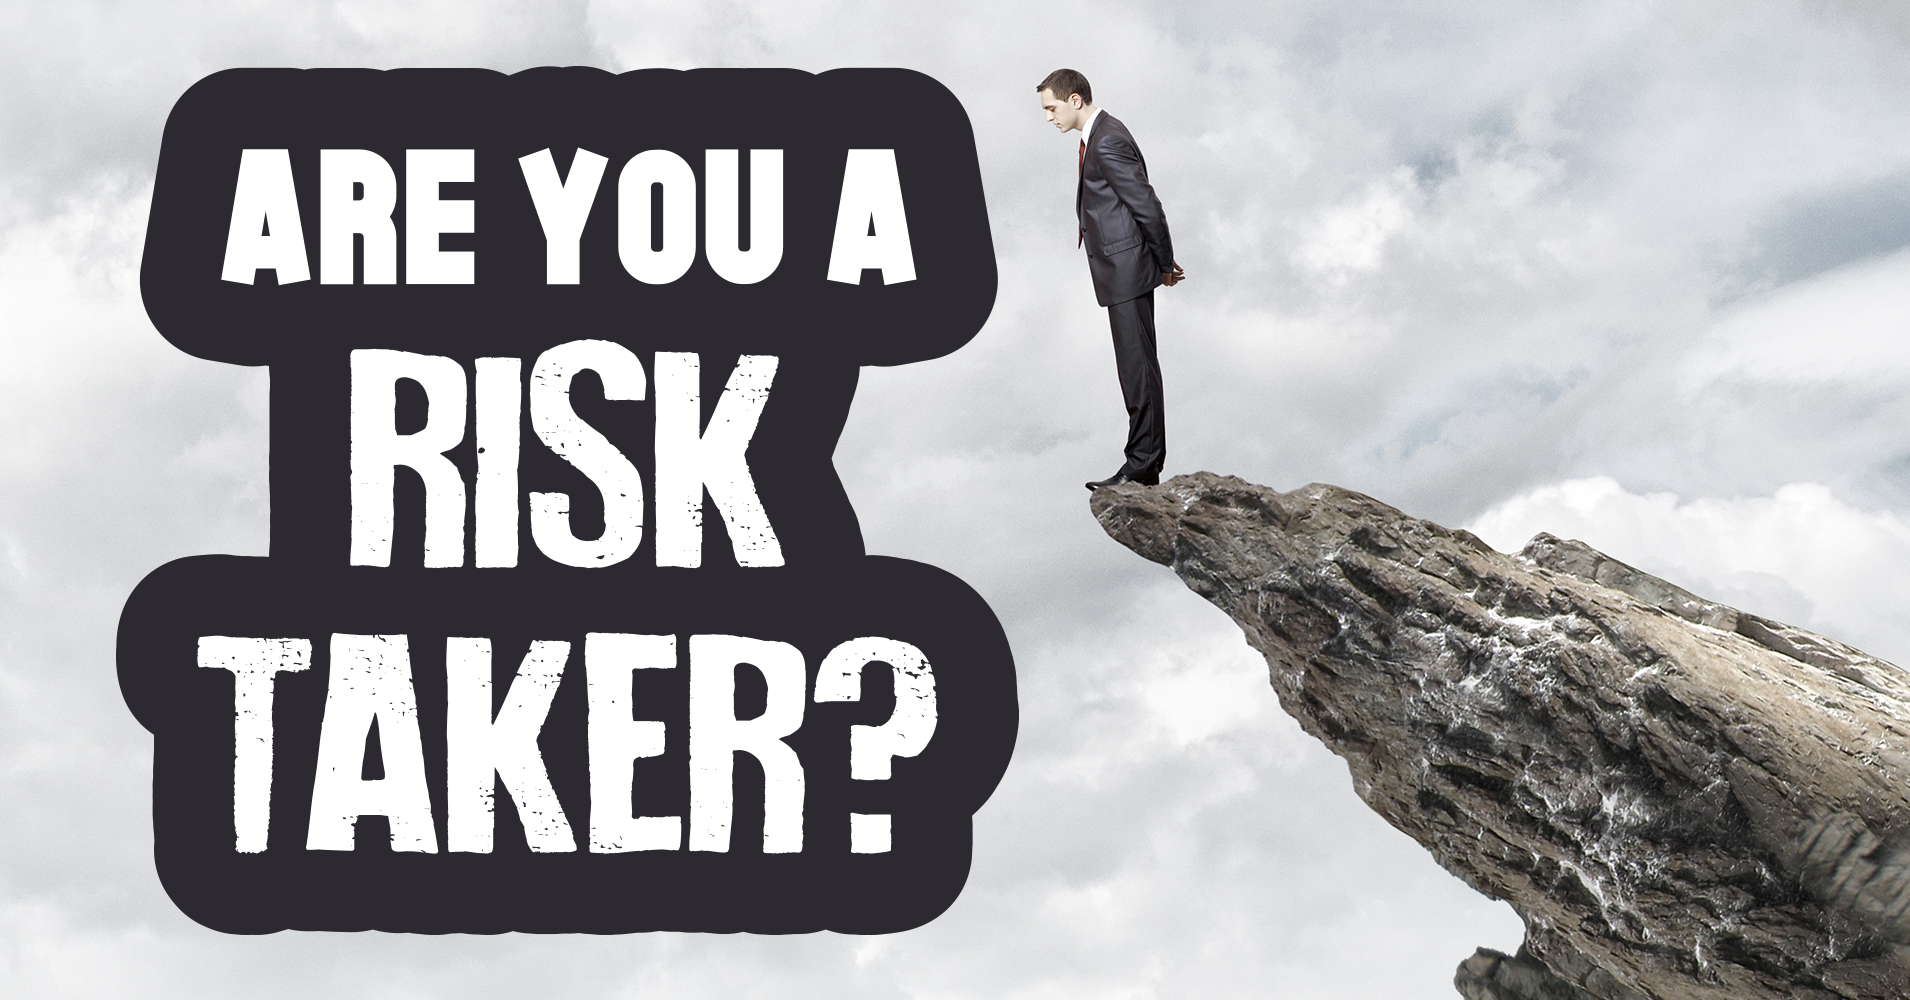 Well here take. Taking risks. Risk Taker. Риск картинки. Are you a risk Taker.